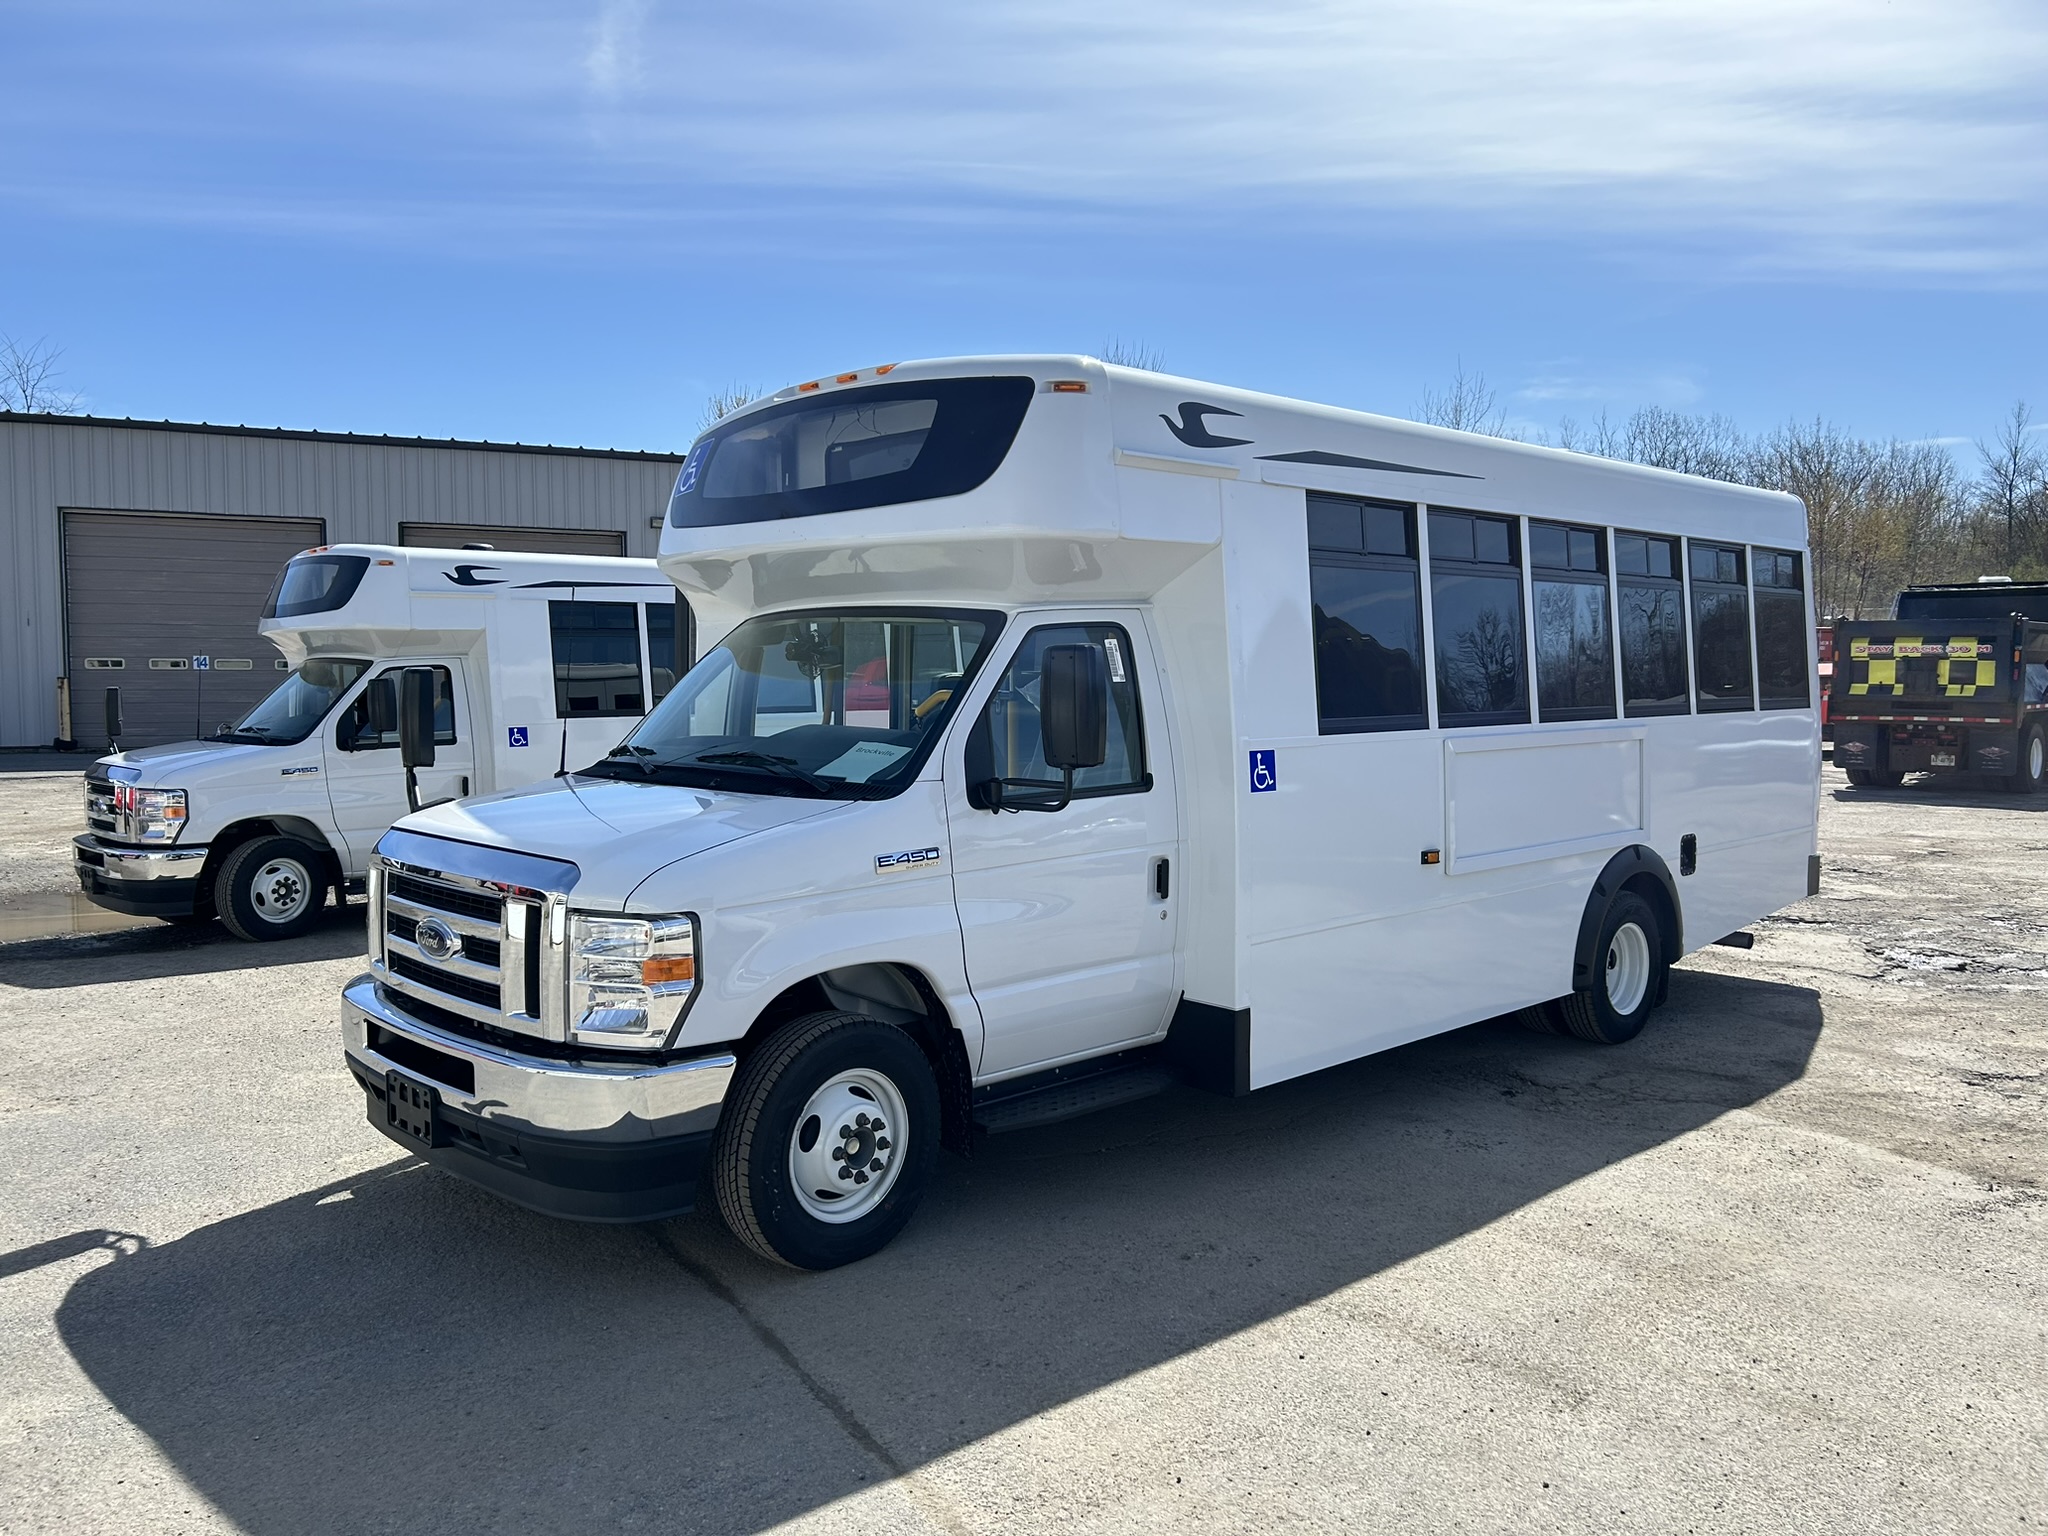 Two New City Transit Buses Have Arrived!